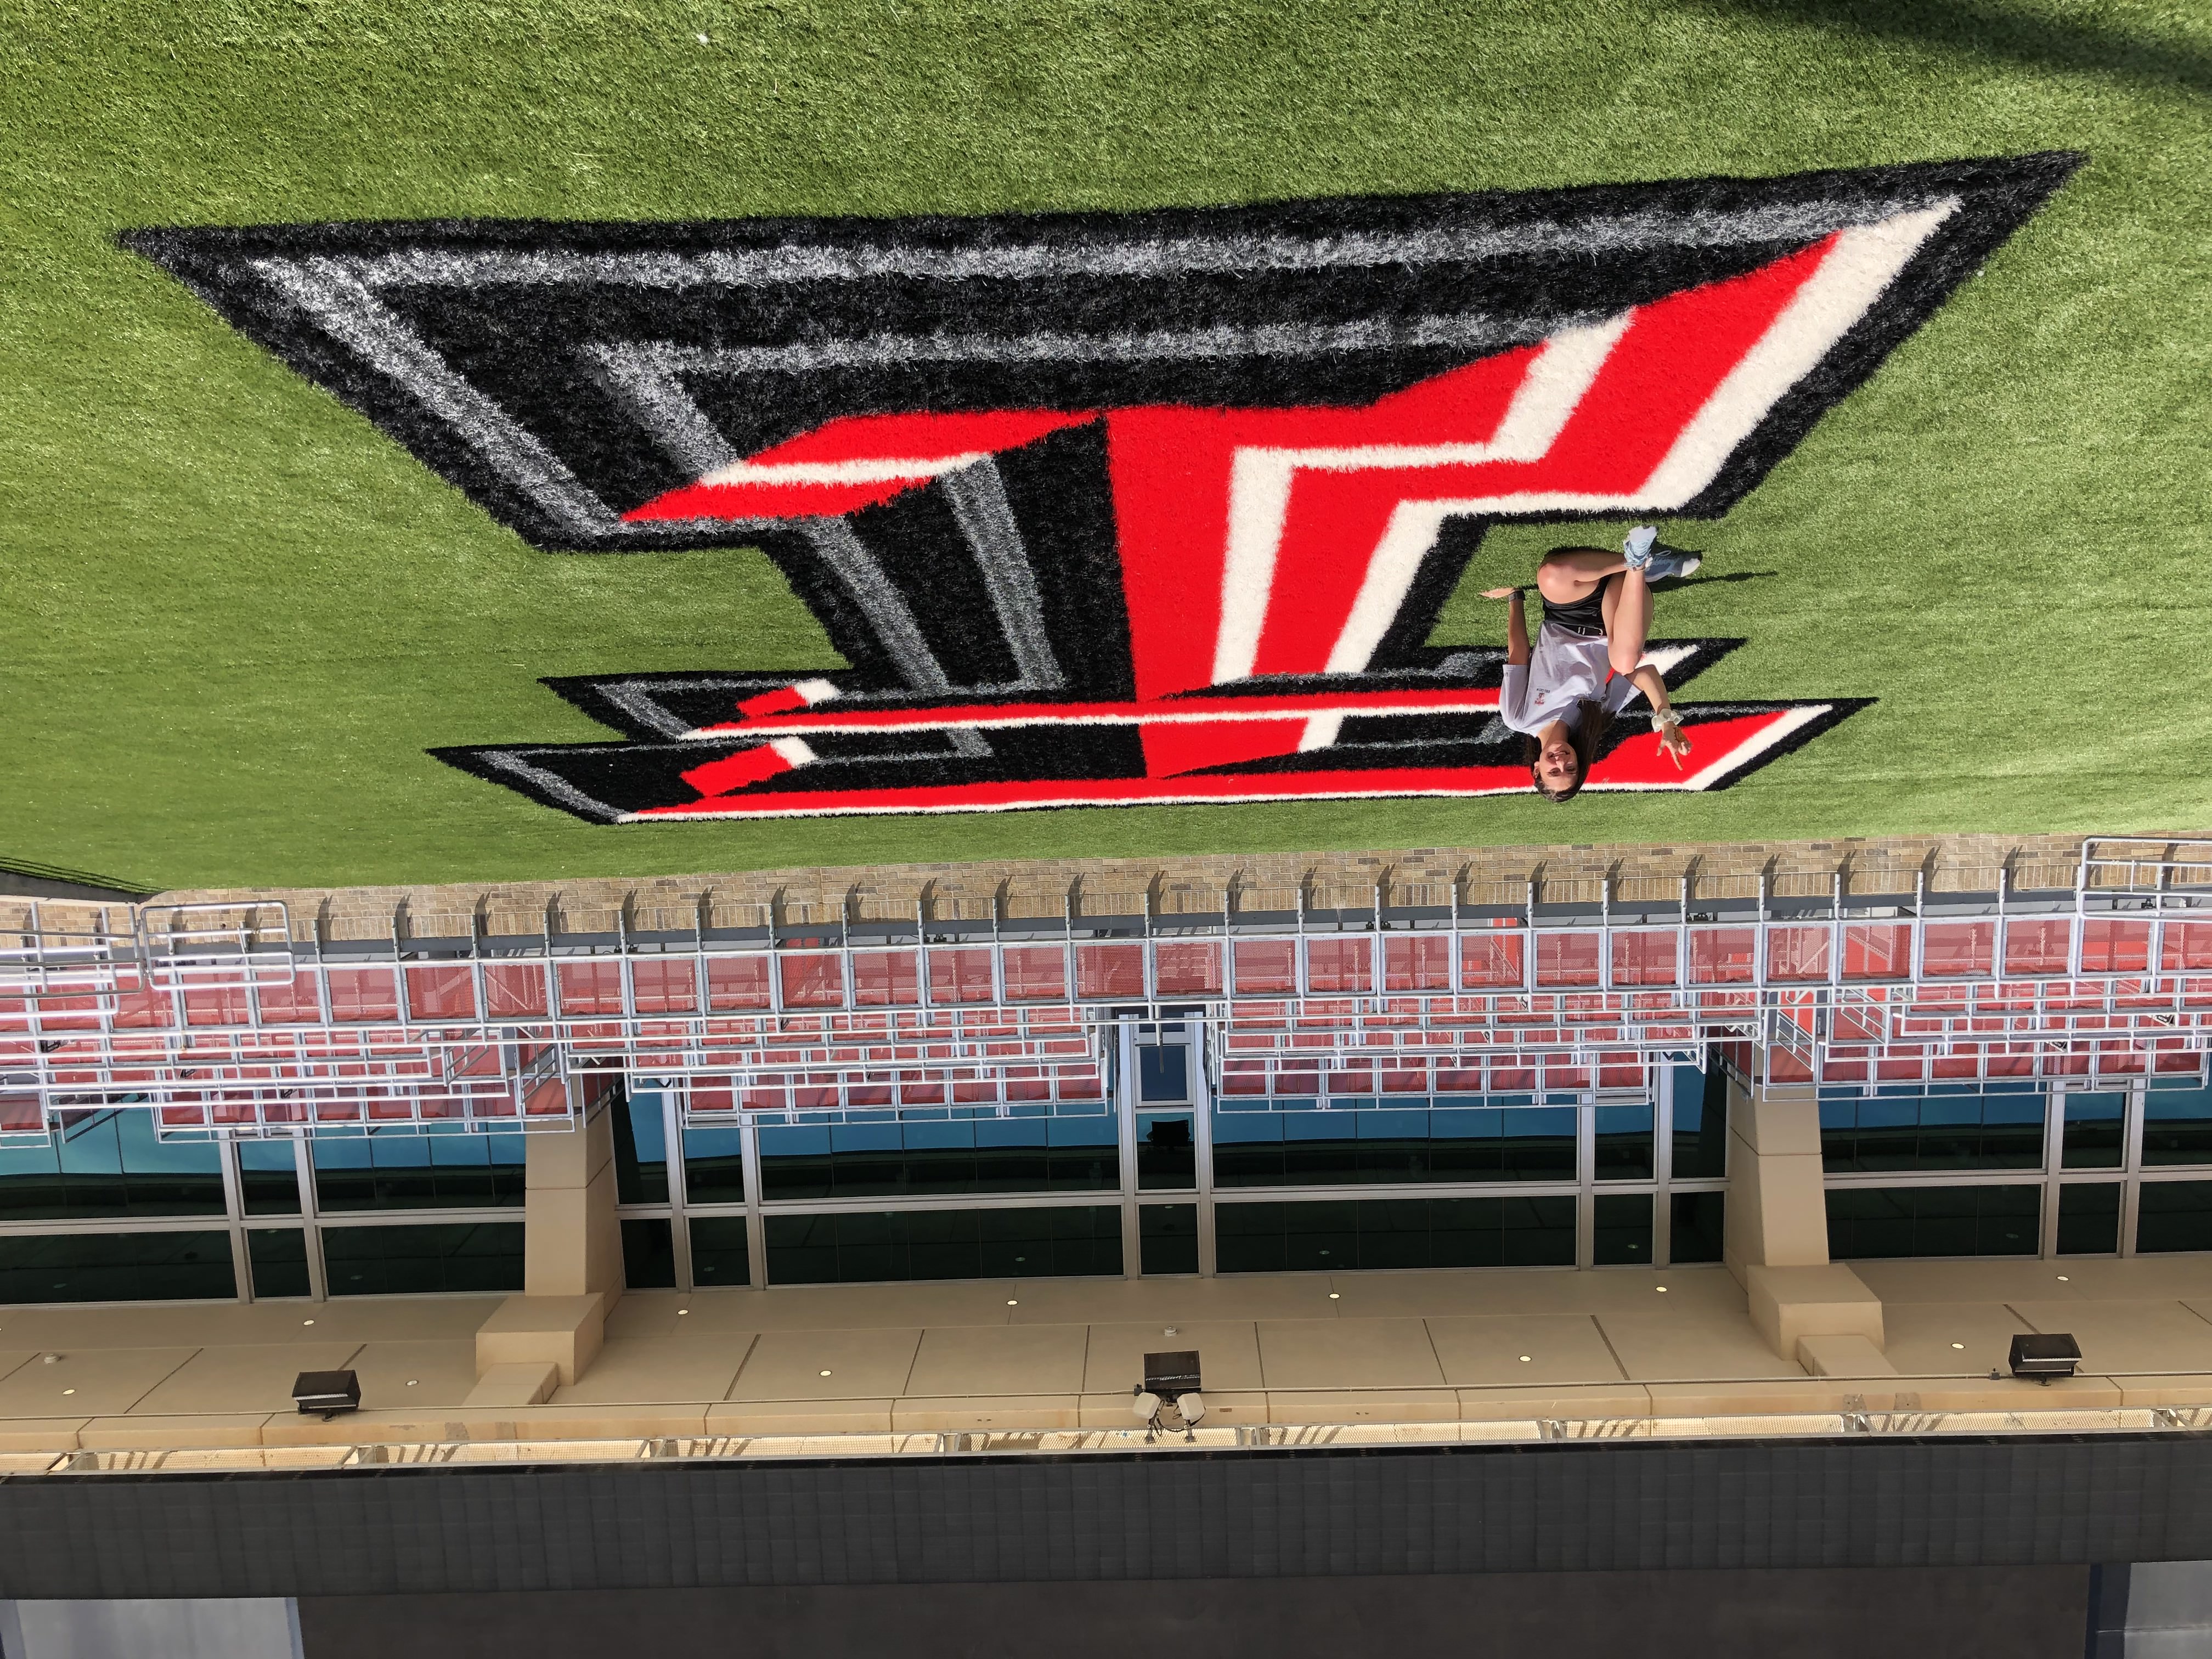 A picture of me at the Jones AT&T stadium